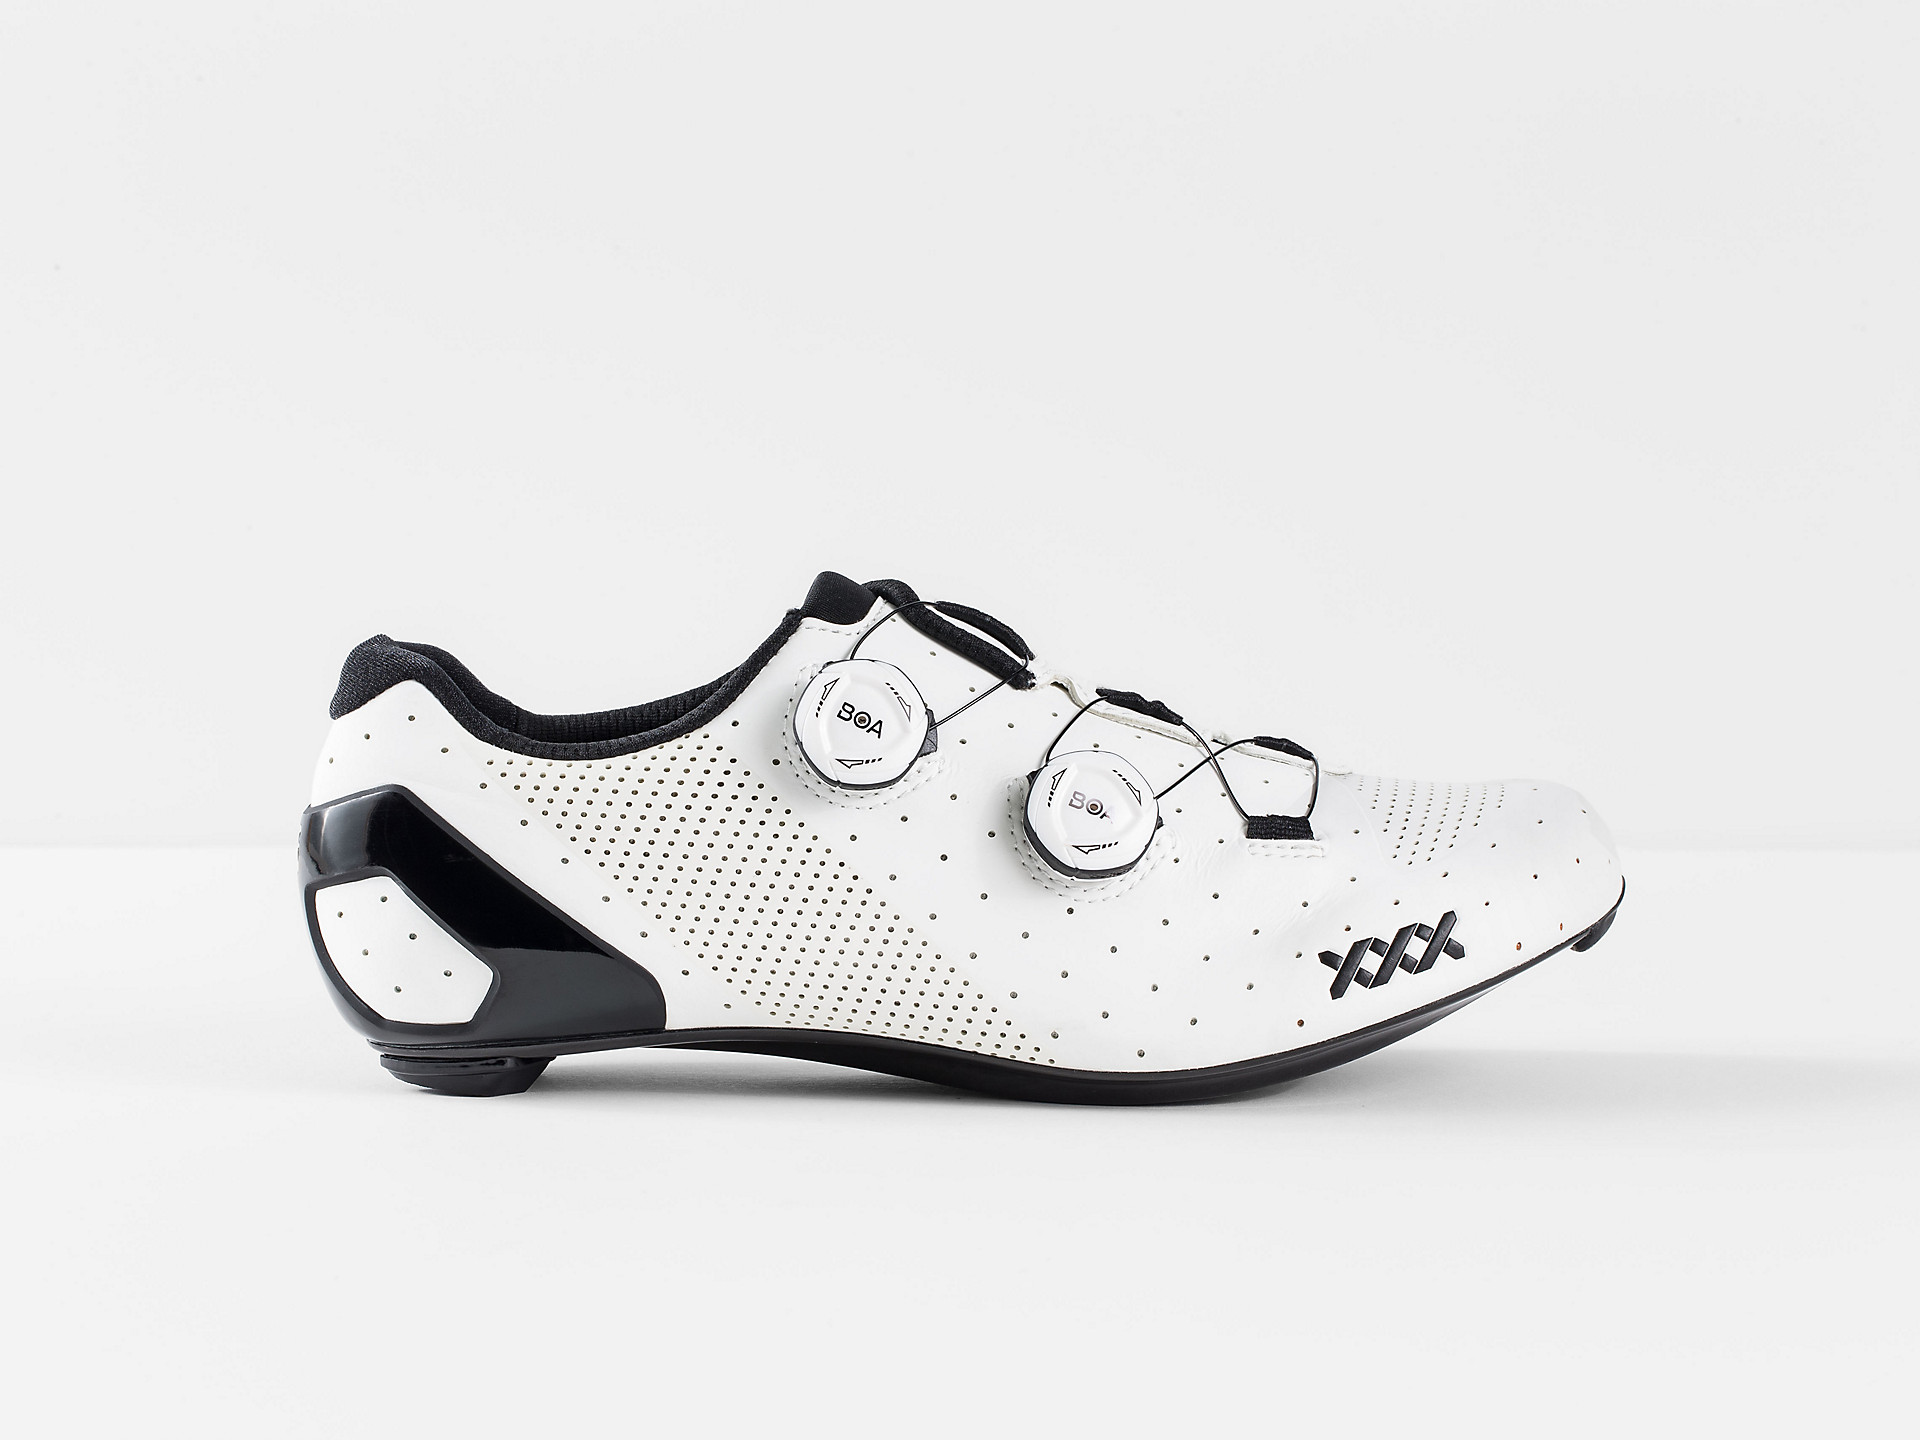 Details about   MTB Cycling Shoes Mens Professional Racing Road SPD Pedal Bike Bicycle Sneakers 